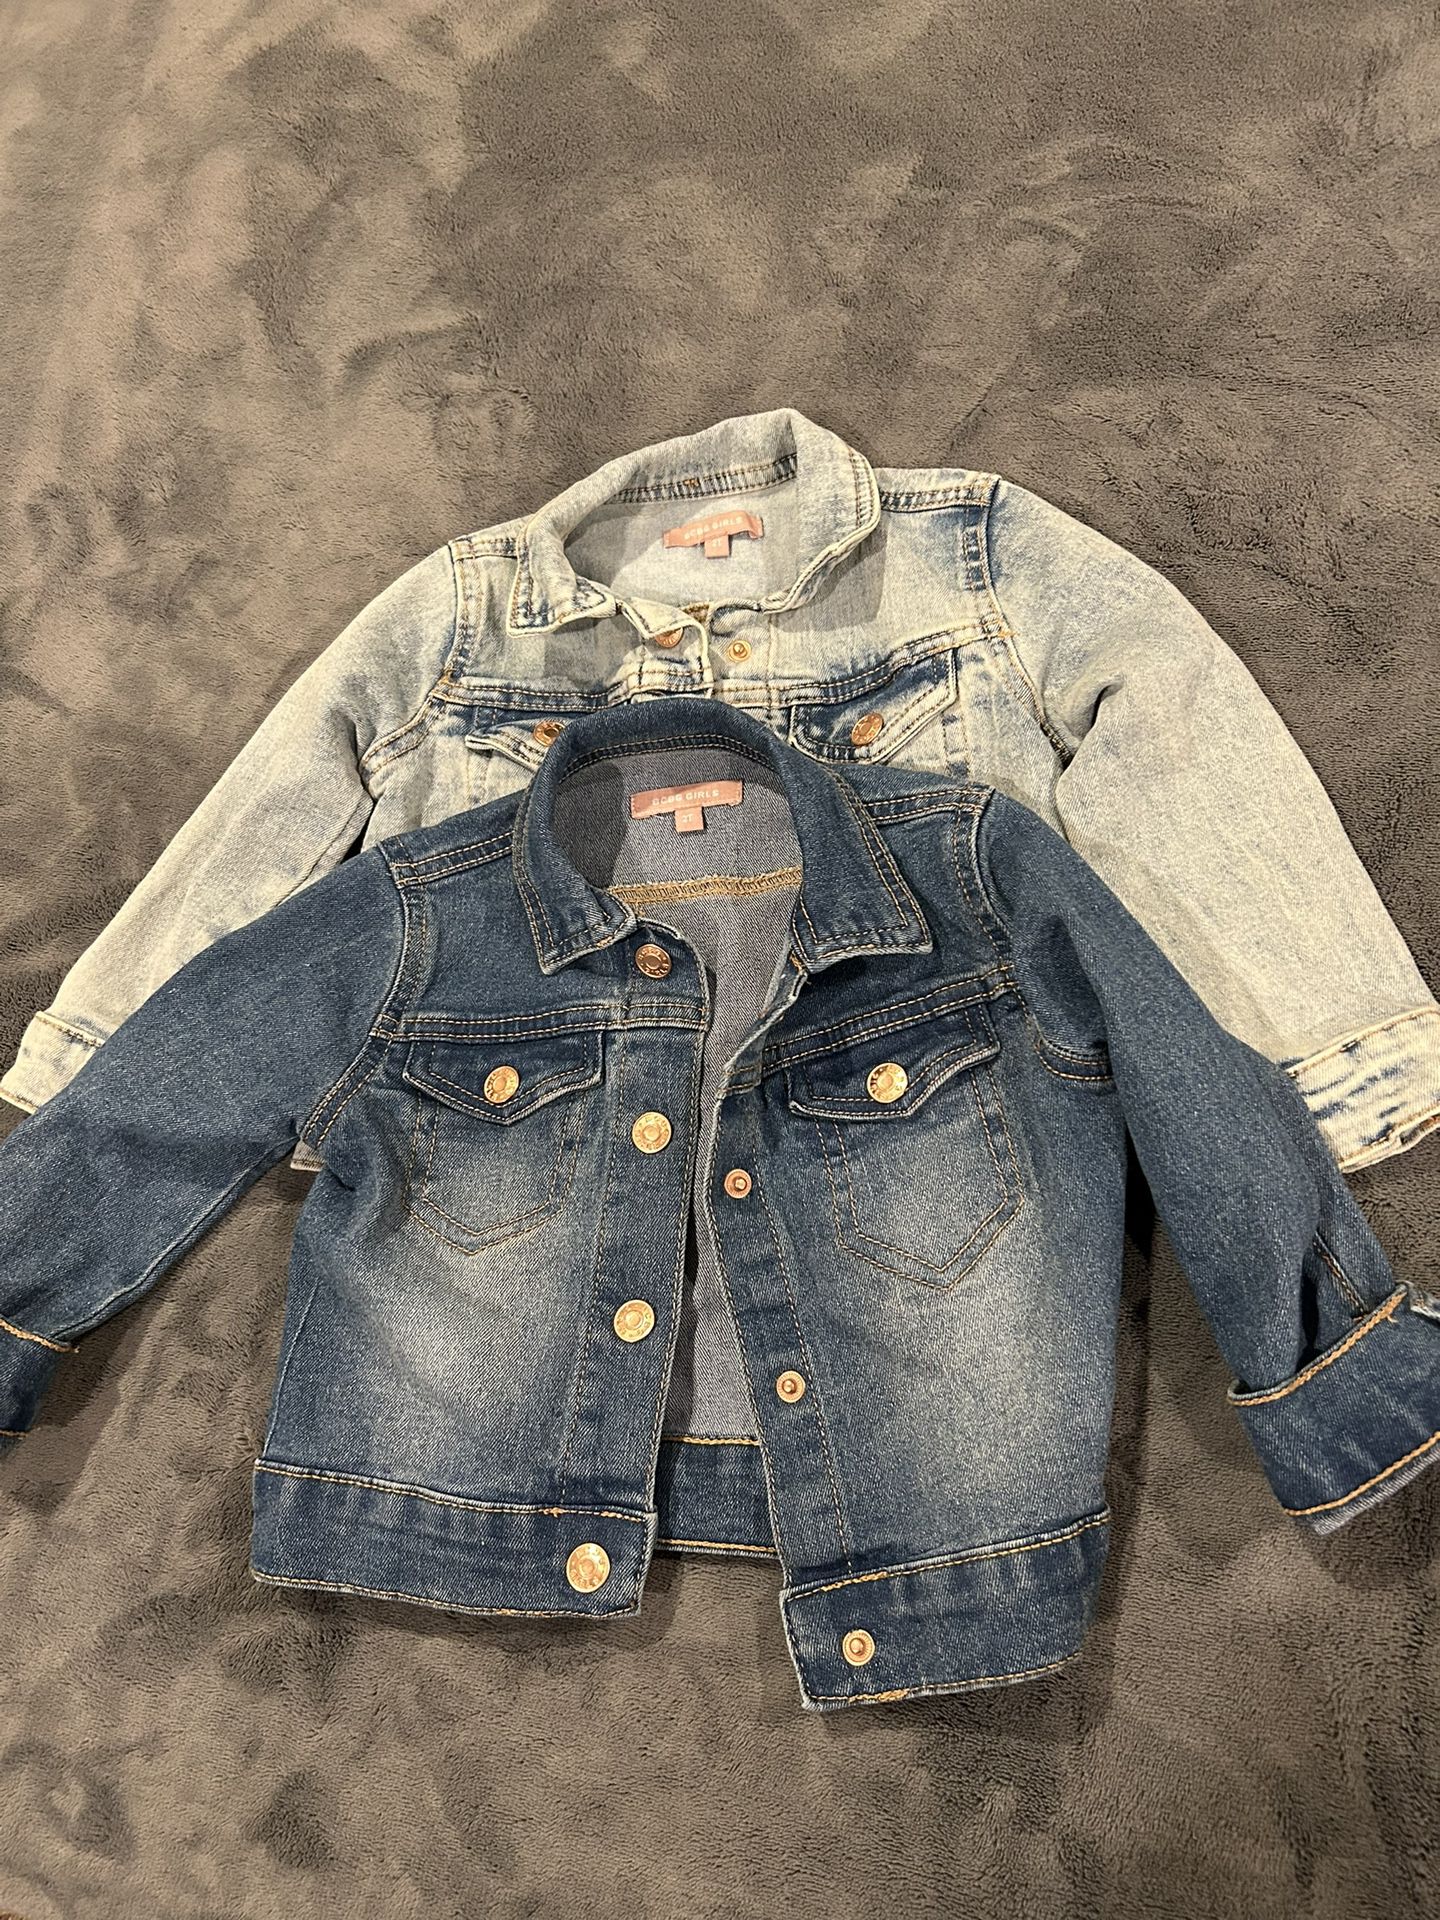 Toddler 2T Jean Jackets